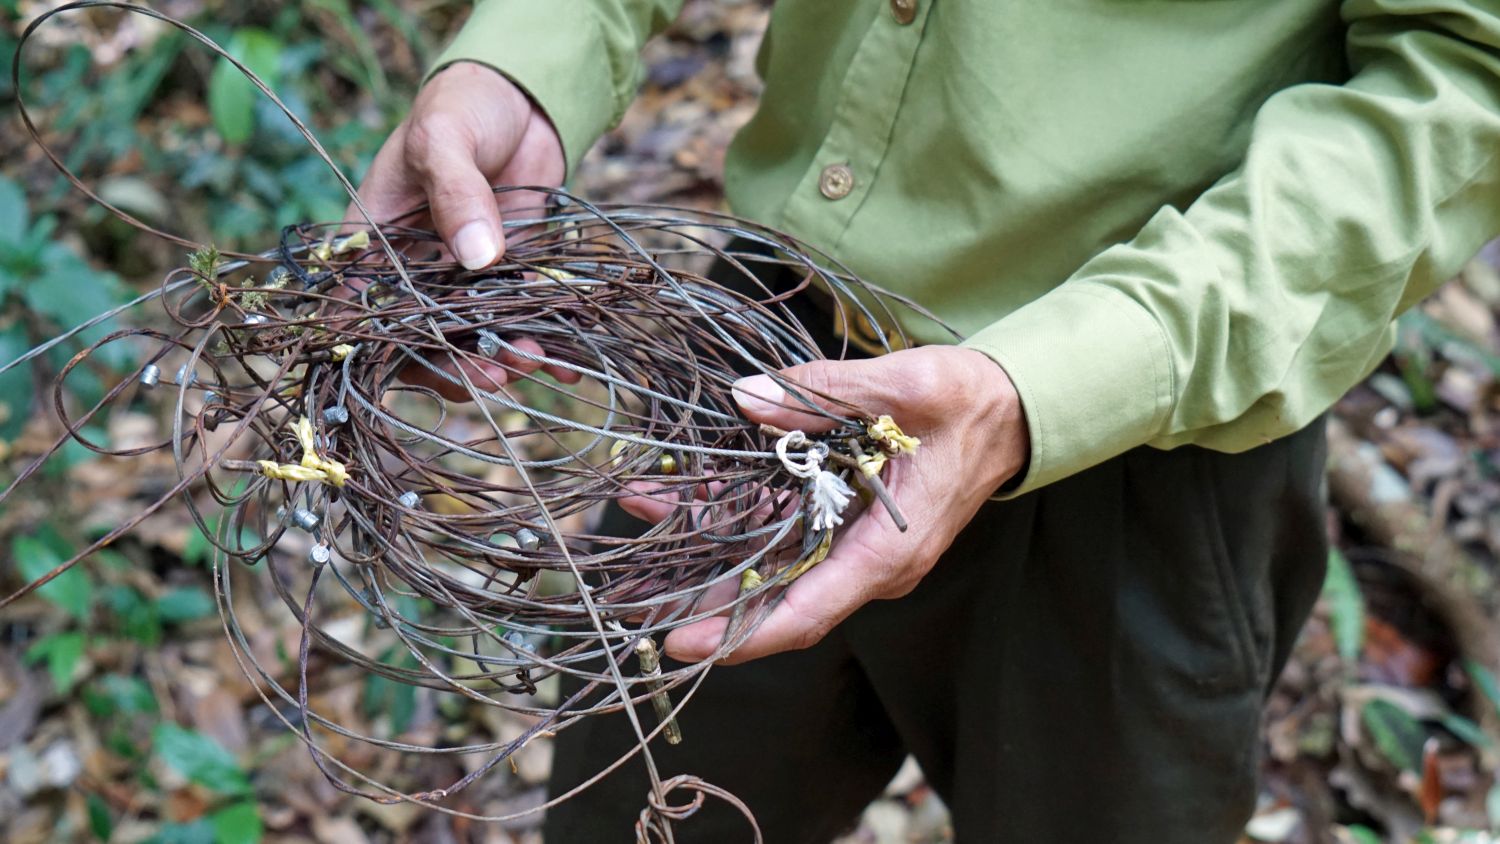 Snares were collected by forest rangers 